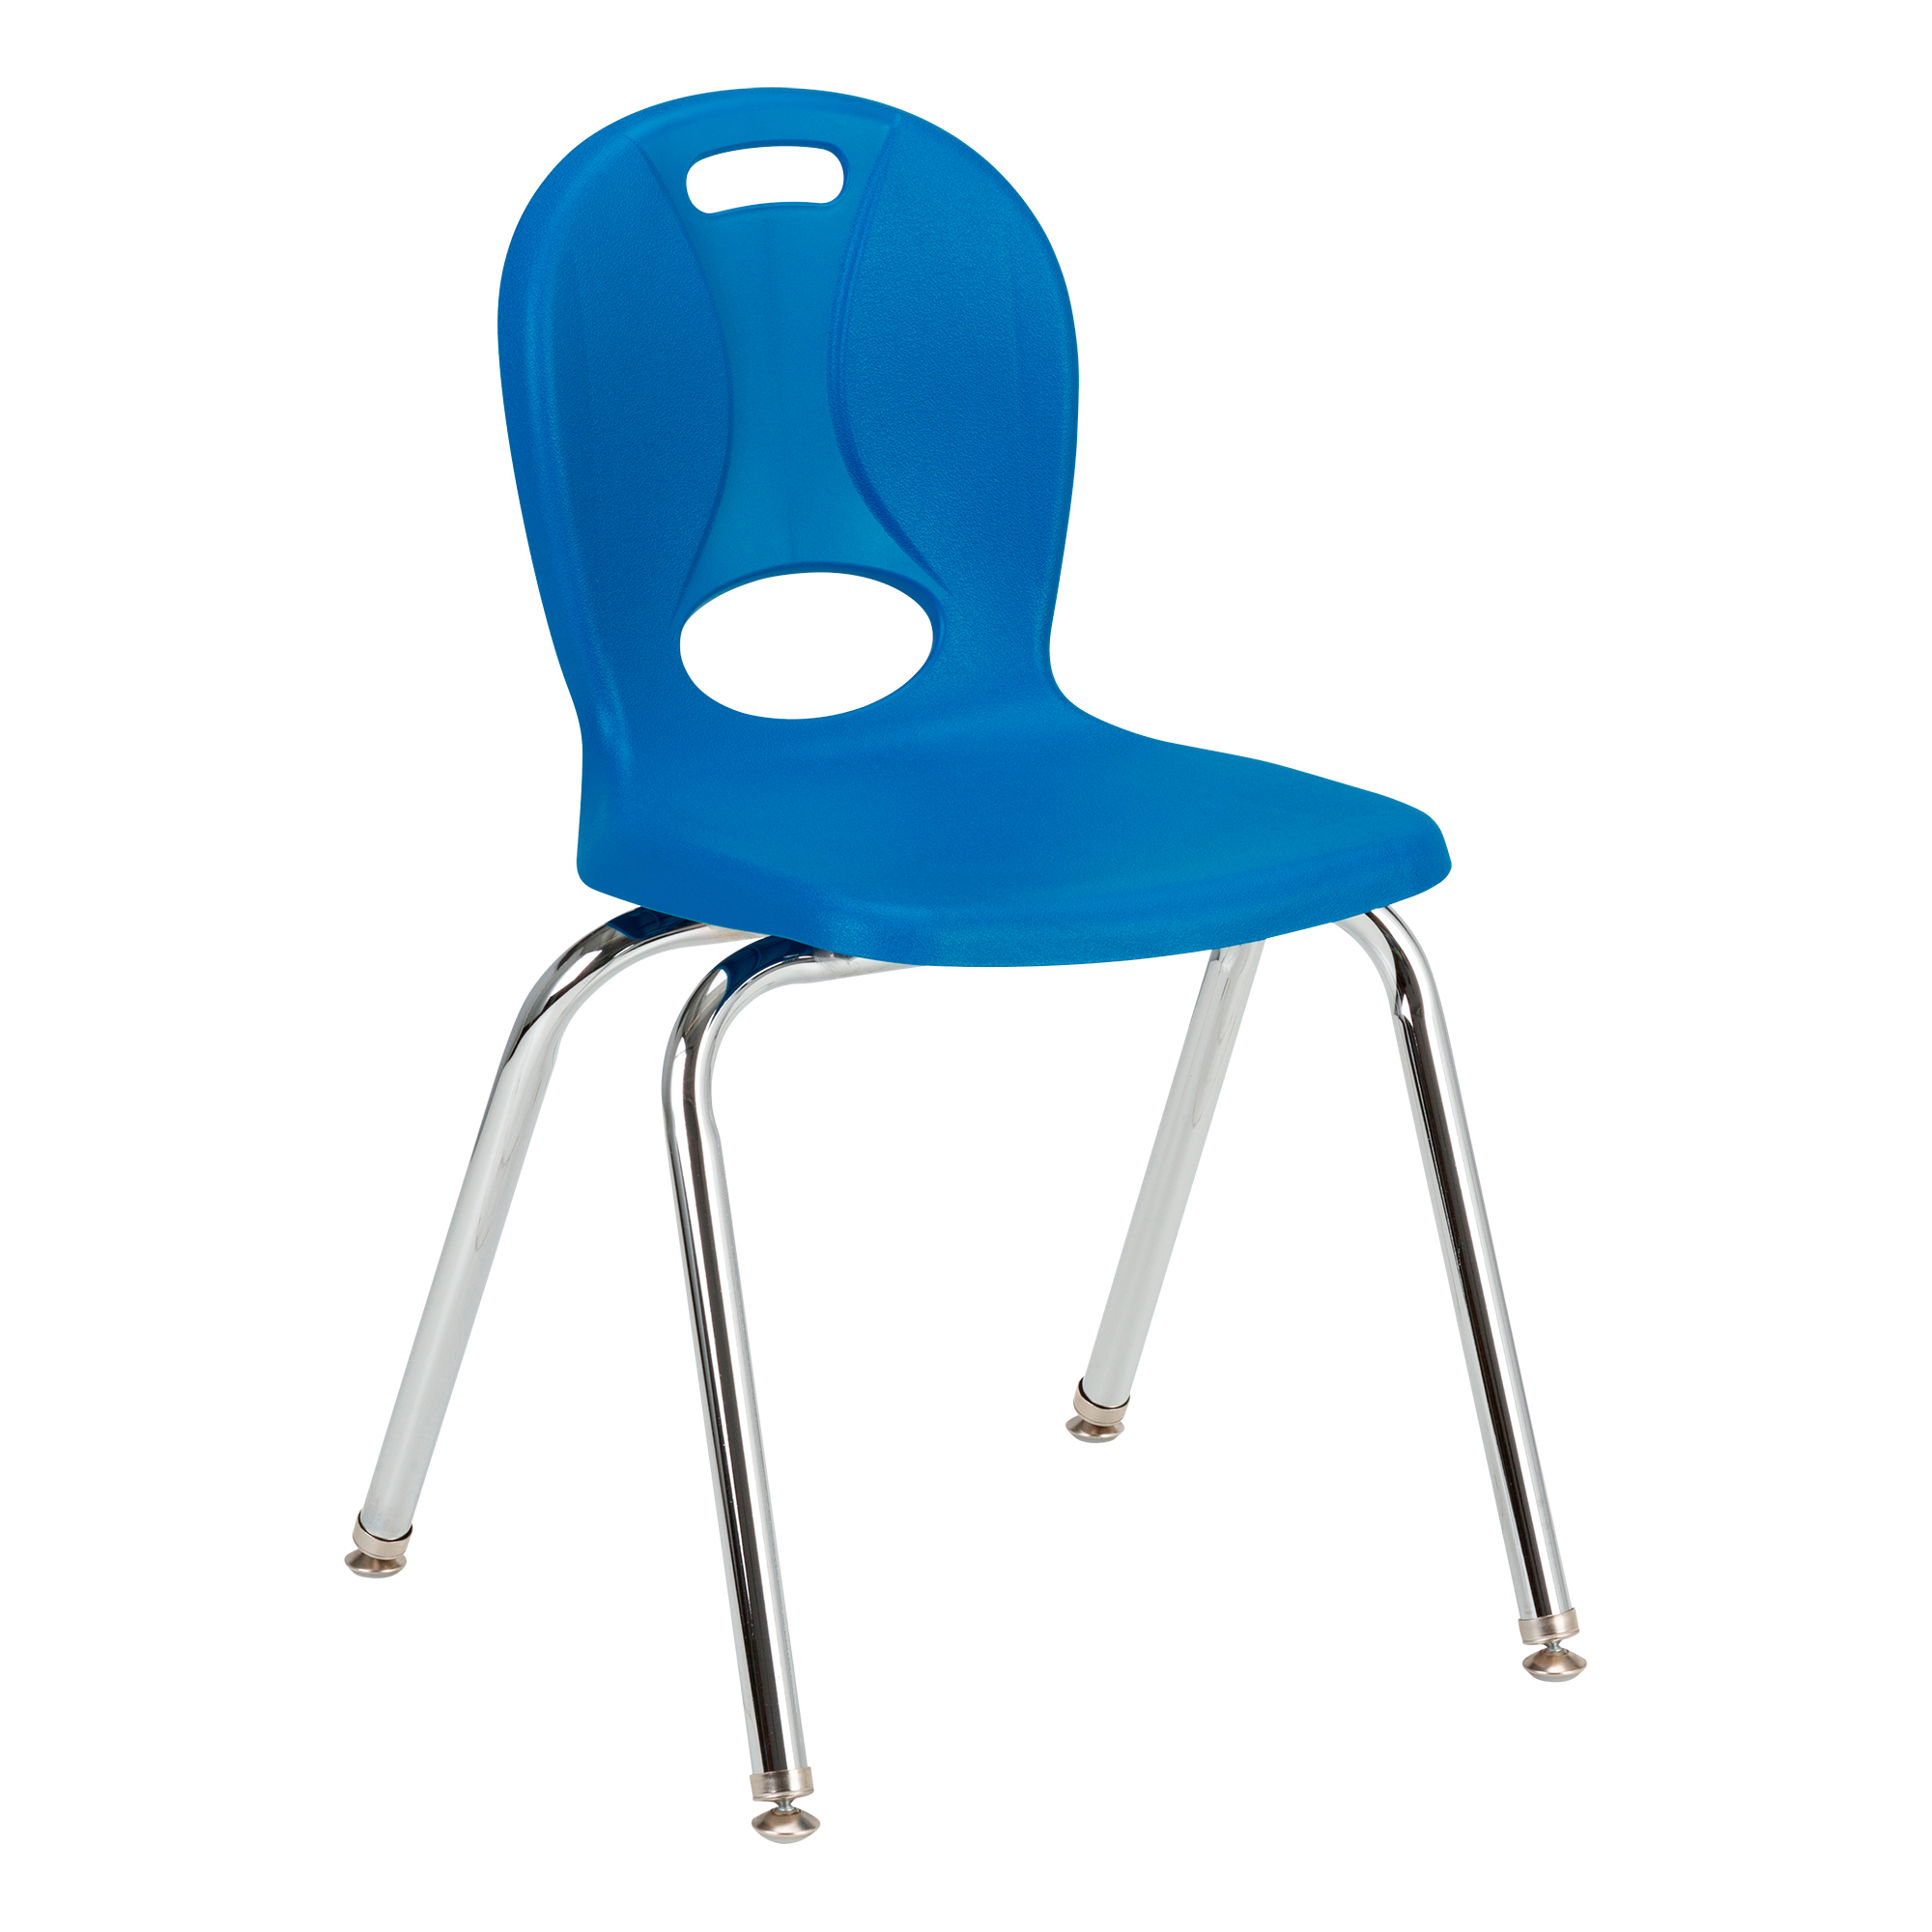 Learniture Structure Series School Chair (16" Seat Height) at School